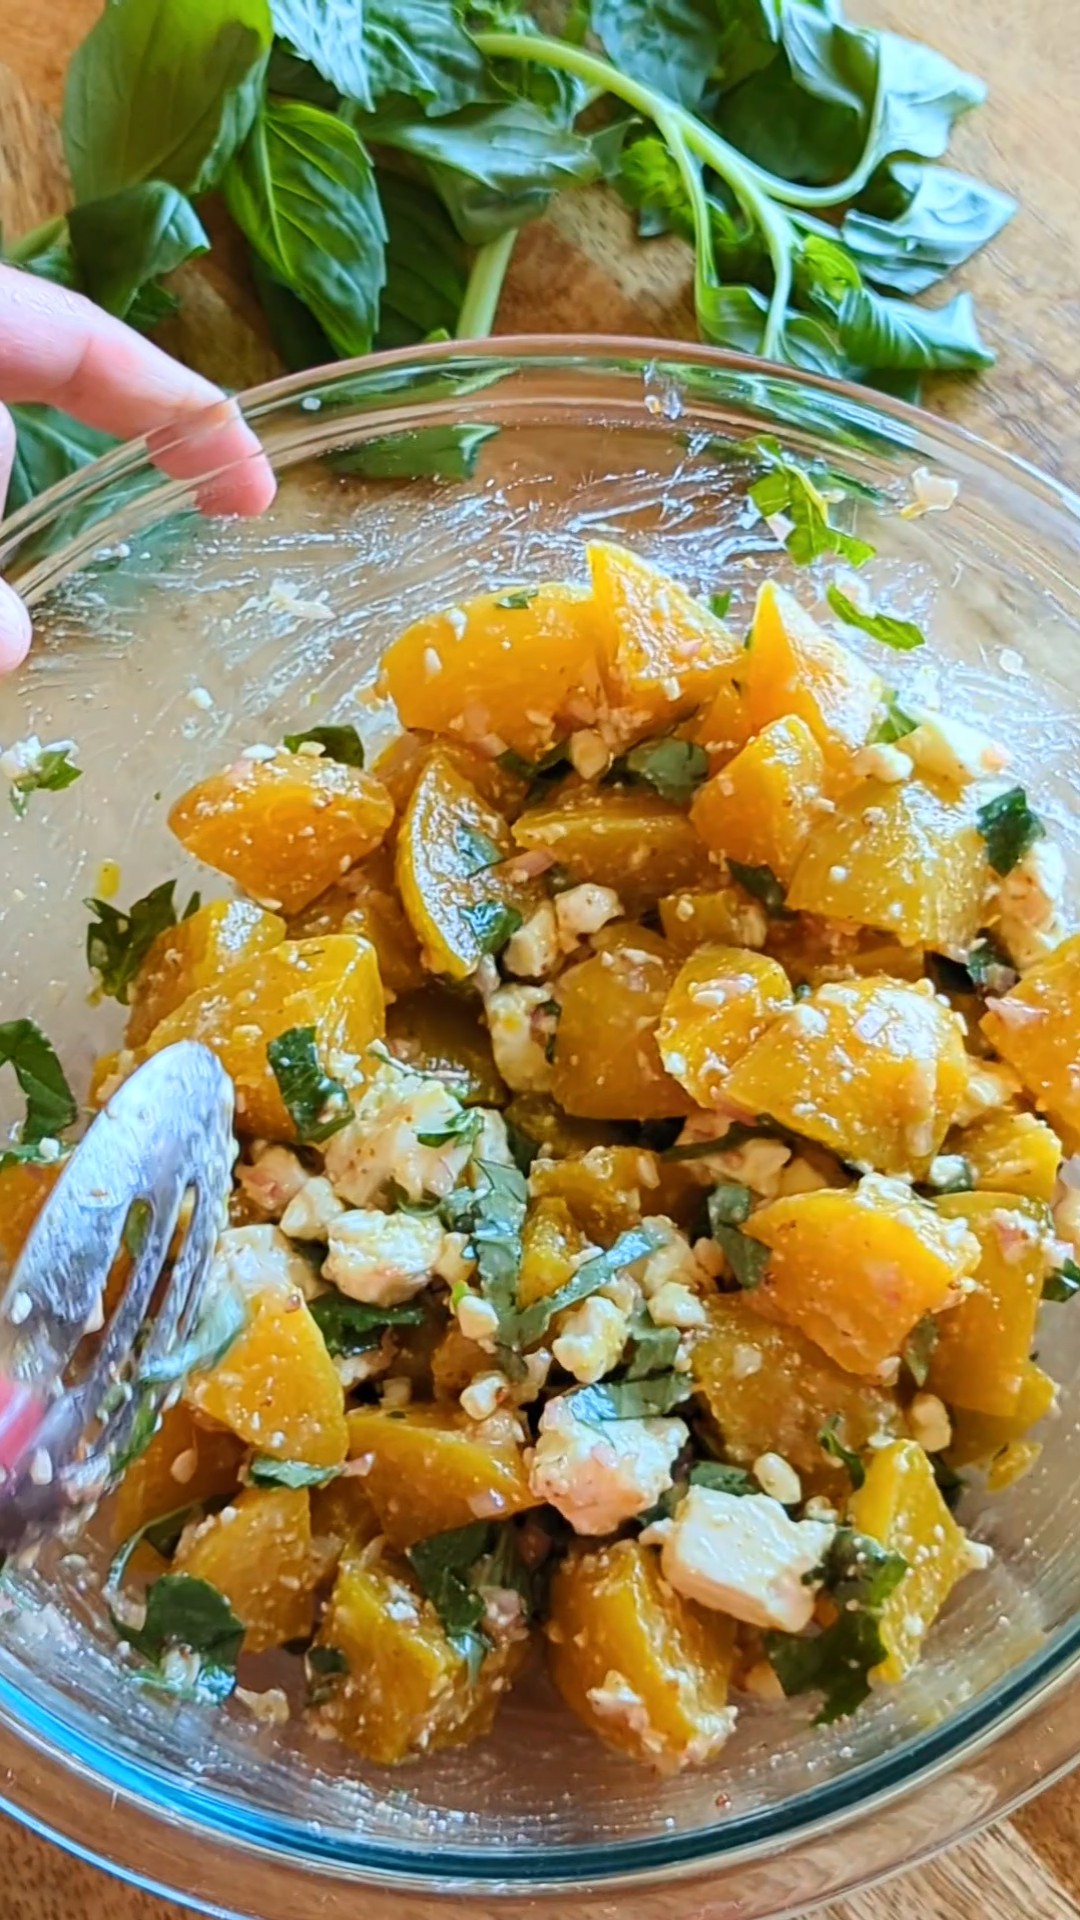 Mixing up a big glass bowl of chilled golden beet salad with feta and basil.